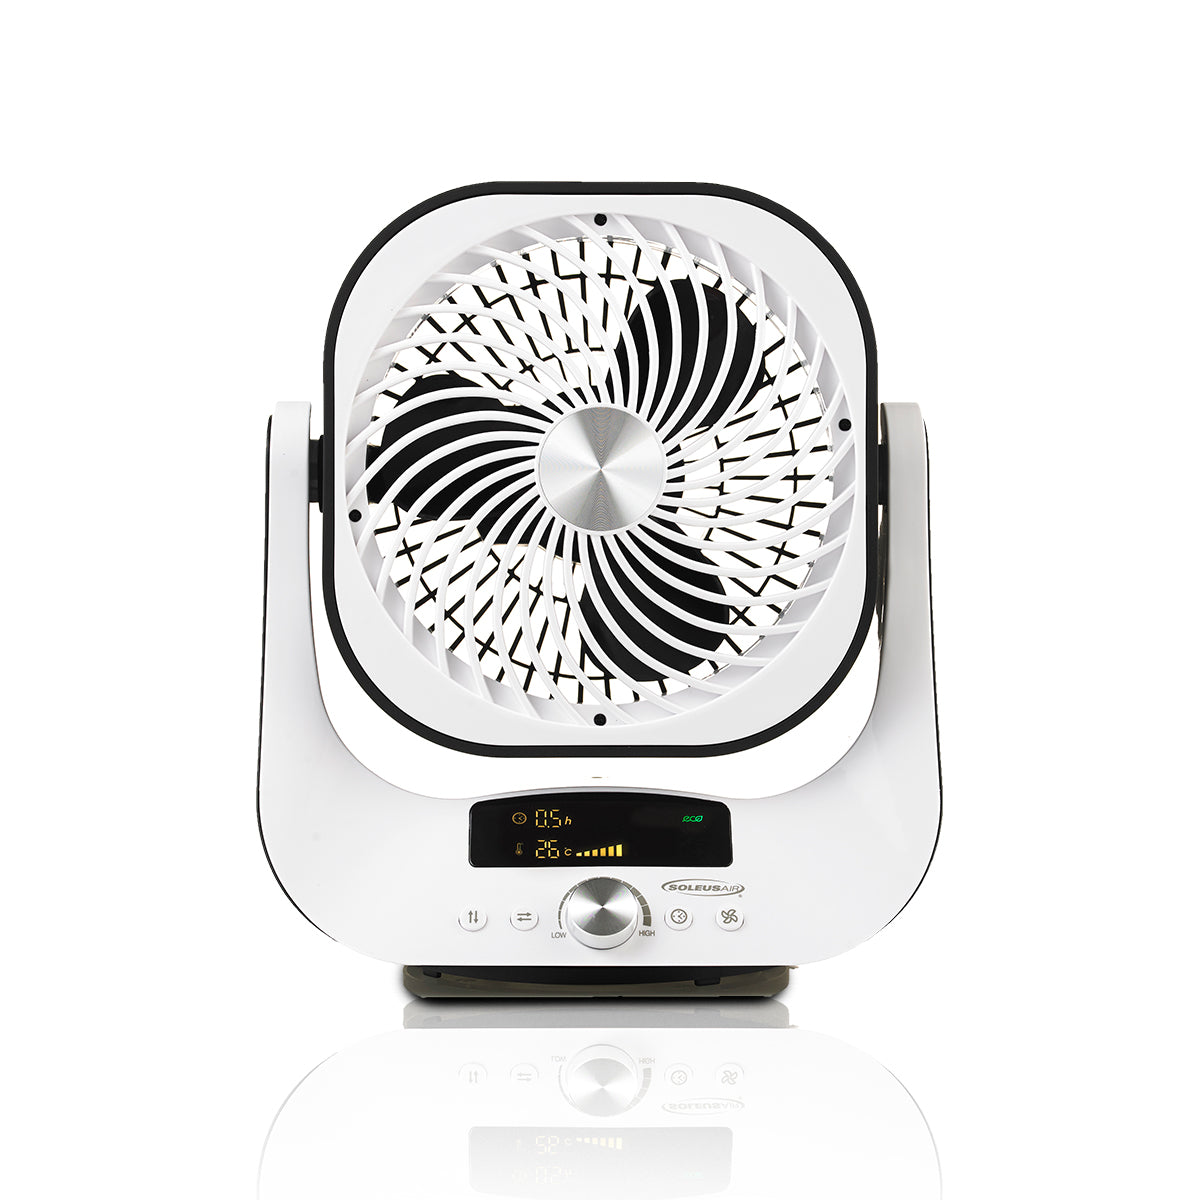 Premium BLDC Circulator Fan with 12 Fan Speeds, Automatic 2-Way Oscillation, Digital Display, 7.5 Hour Auto Timer, Whisper Quiet, For Year Round Use, with Remote Control, Outdoor Indoor Camping Travel